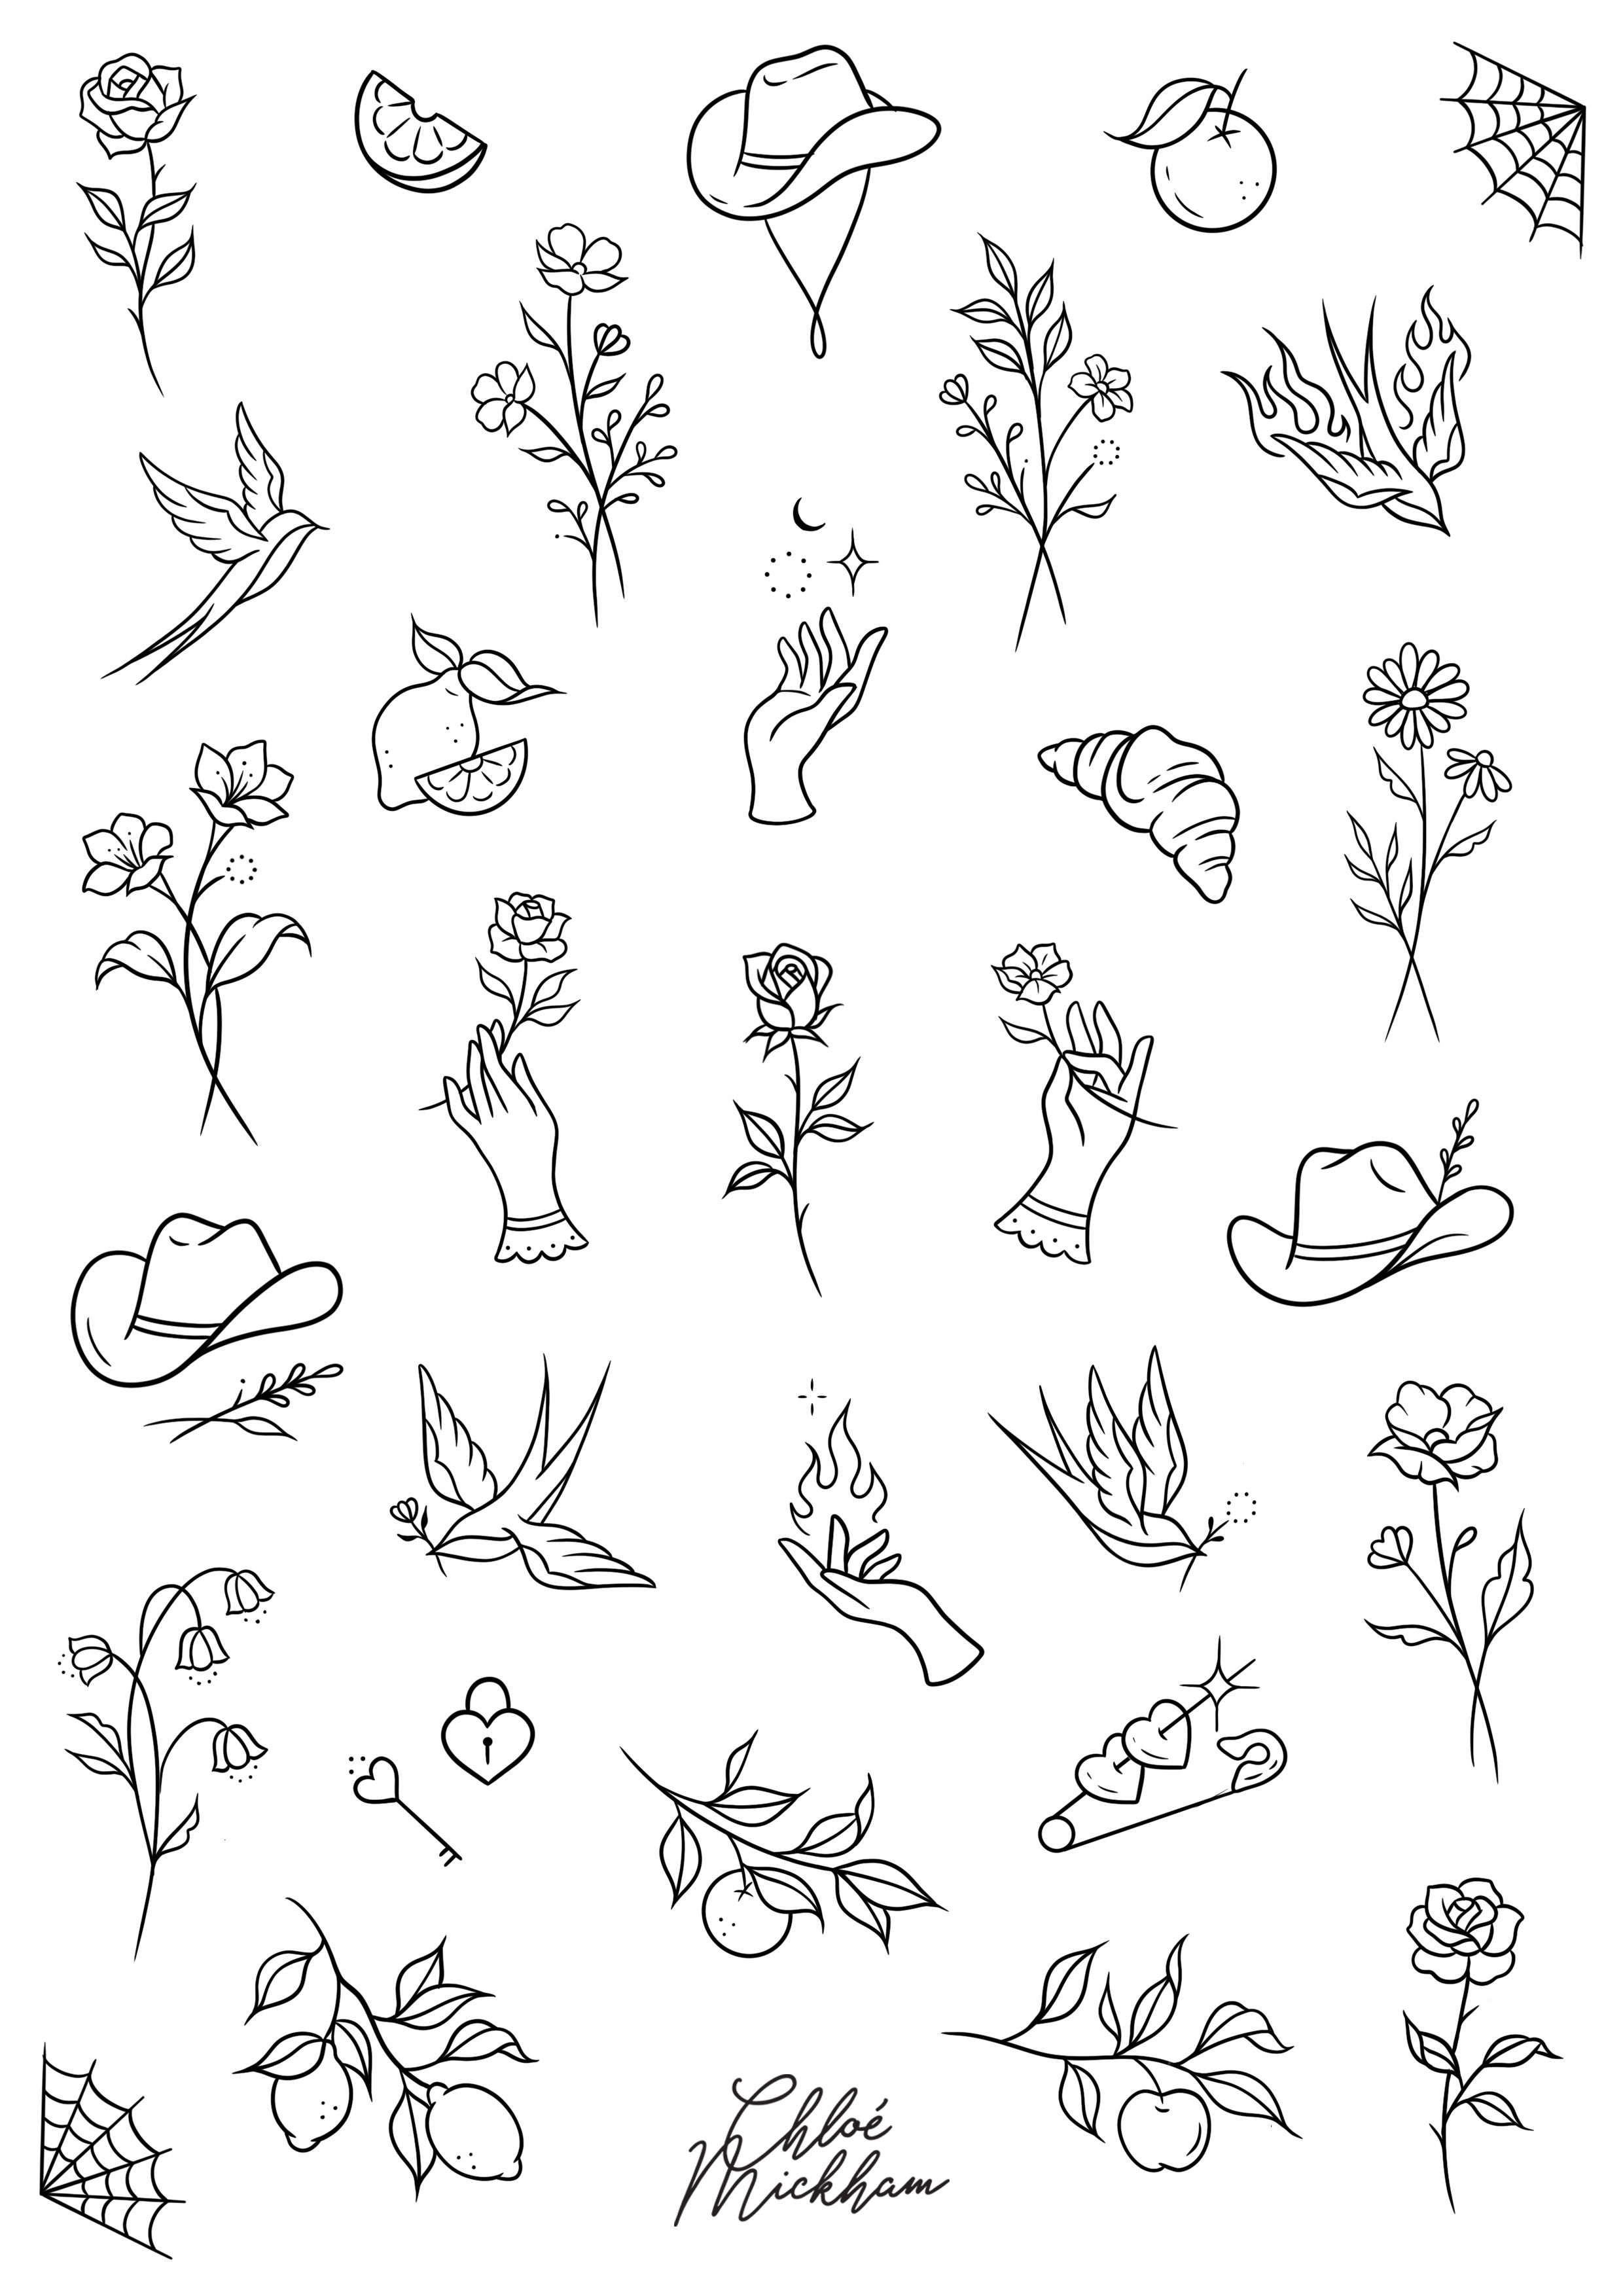 Tattoo Swallow Clipart Transparent Background, Swallow Bird Vintage  Traditional Retro Tattoo Flowers Wire, Retro Tattoo, Tattoo Design, Vintage  Tattoo PNG Image For Free Download